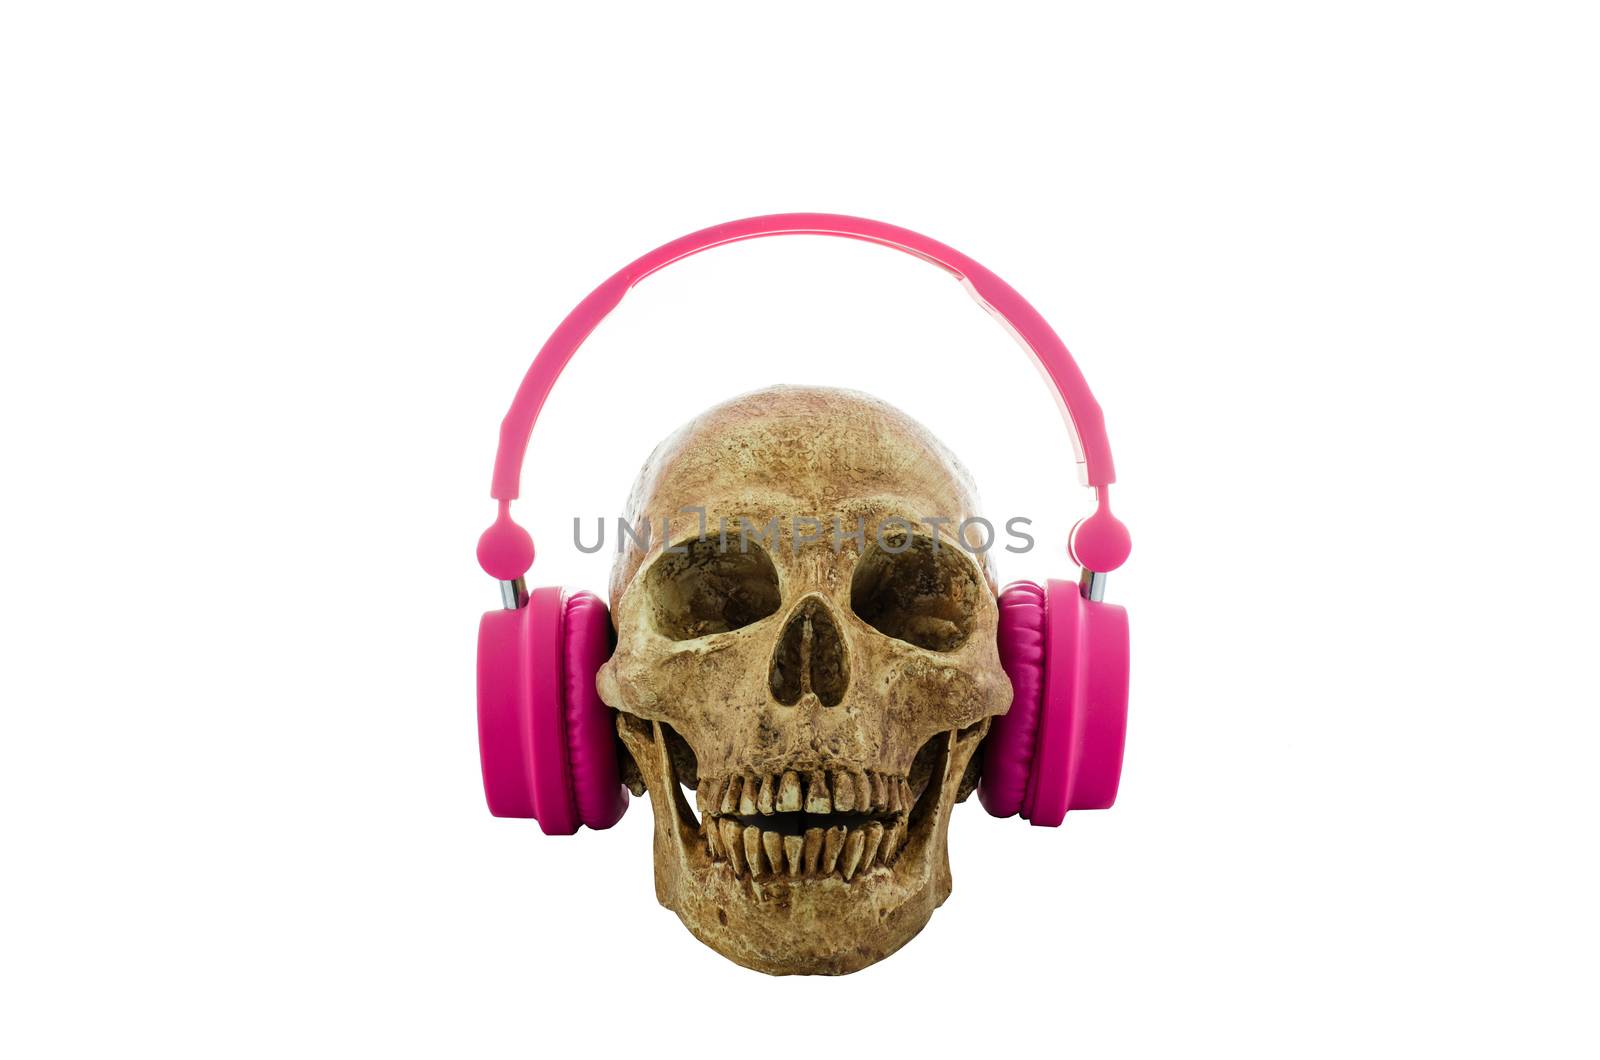 Skull with pink headphones isolated on white background by photobyphotoboy